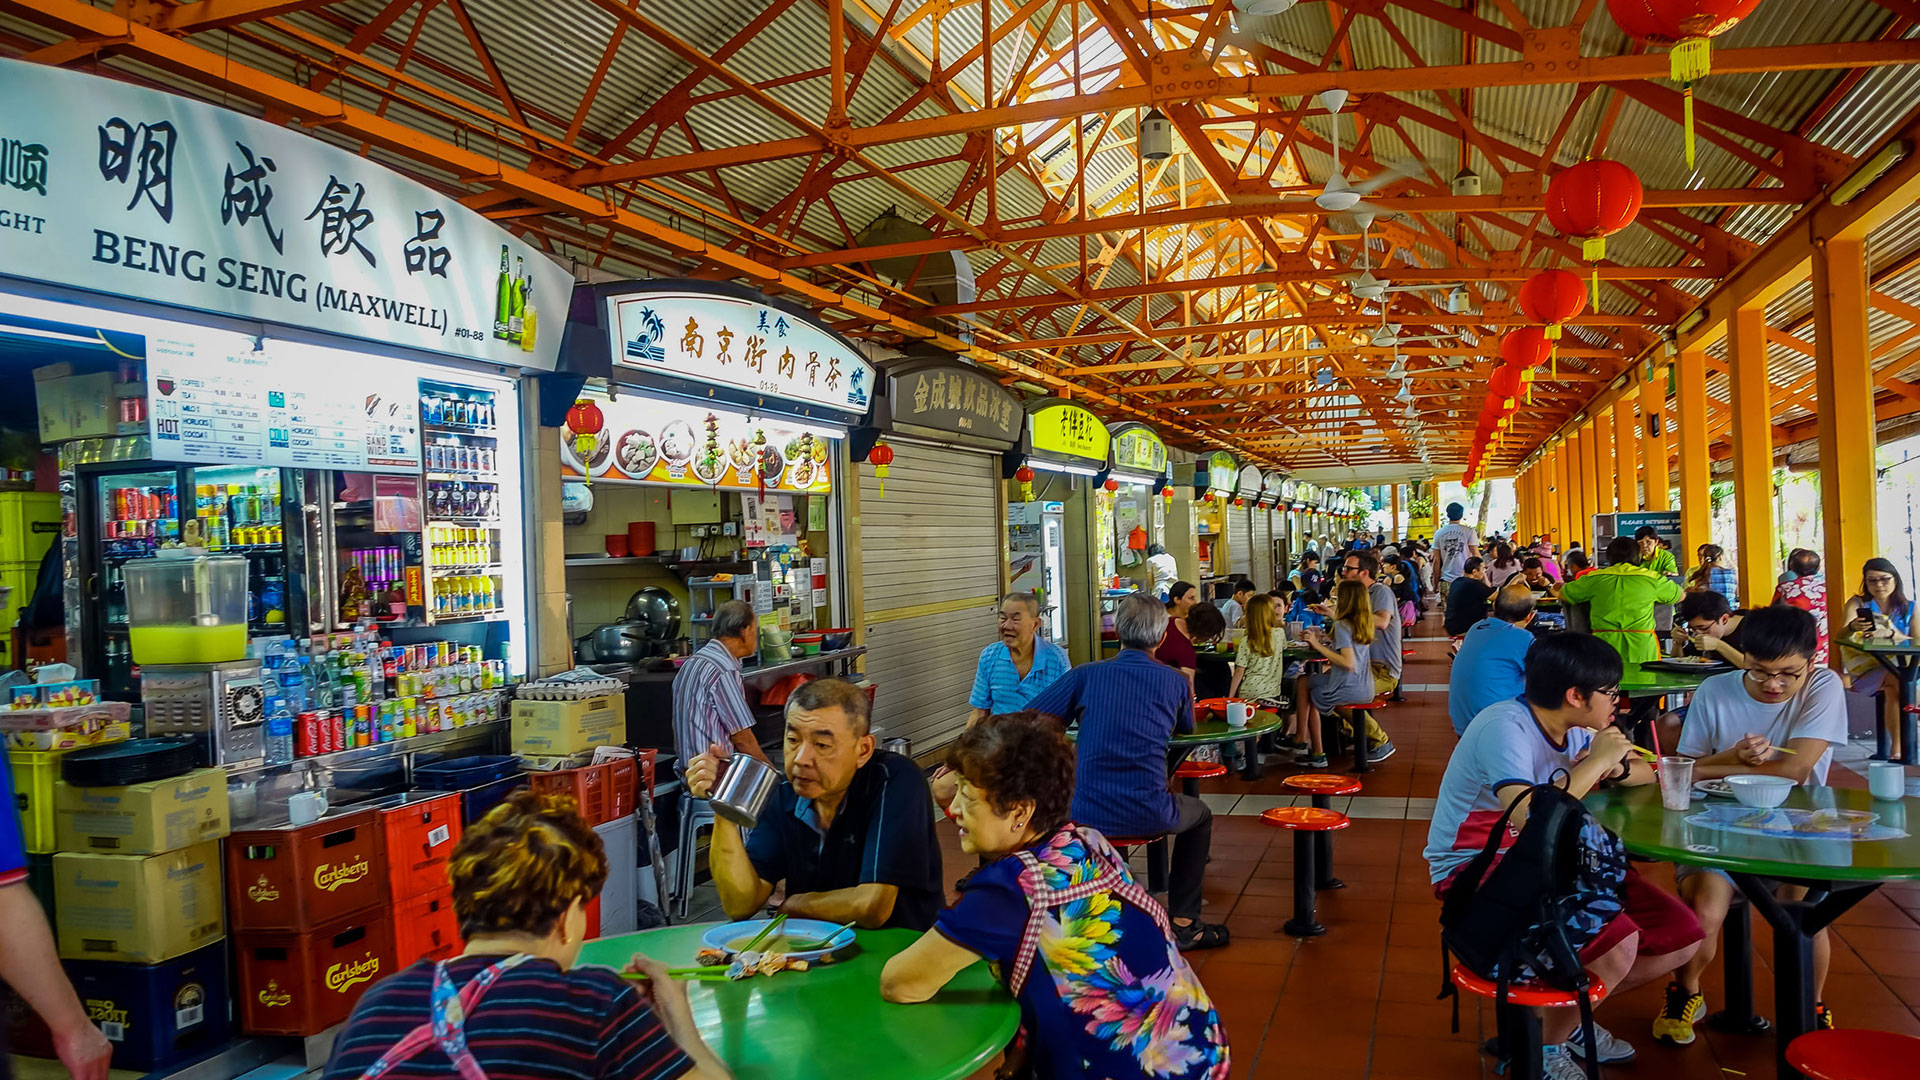 10 must drink Iconic Drinks at Singapore Hawker Centre